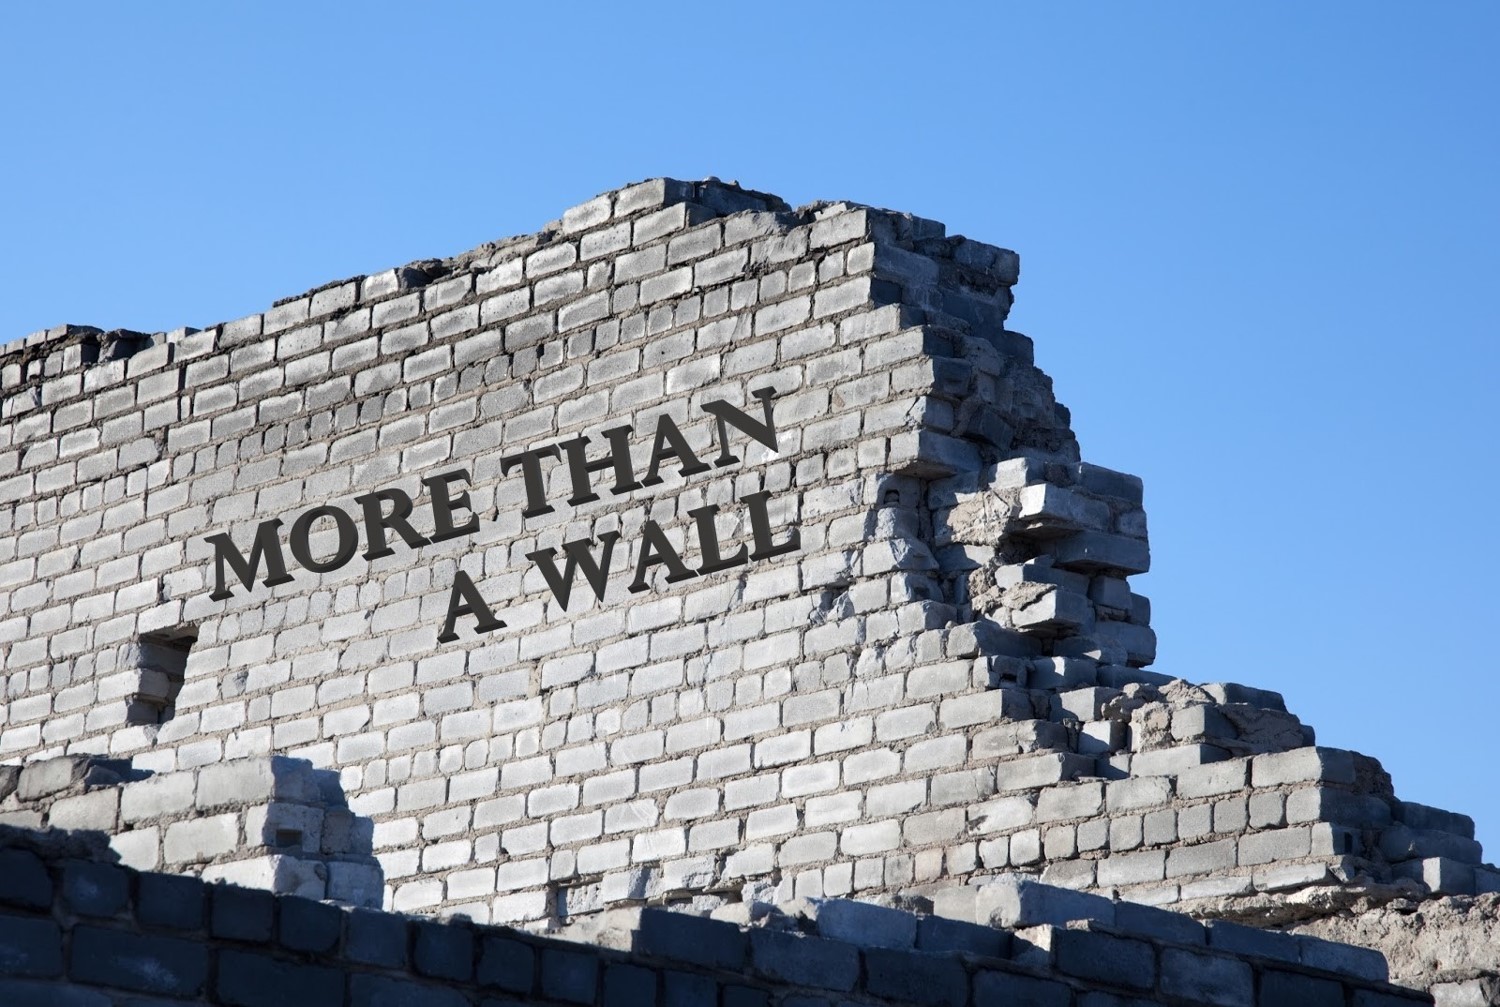 the text "more than a wall" on a half built wall